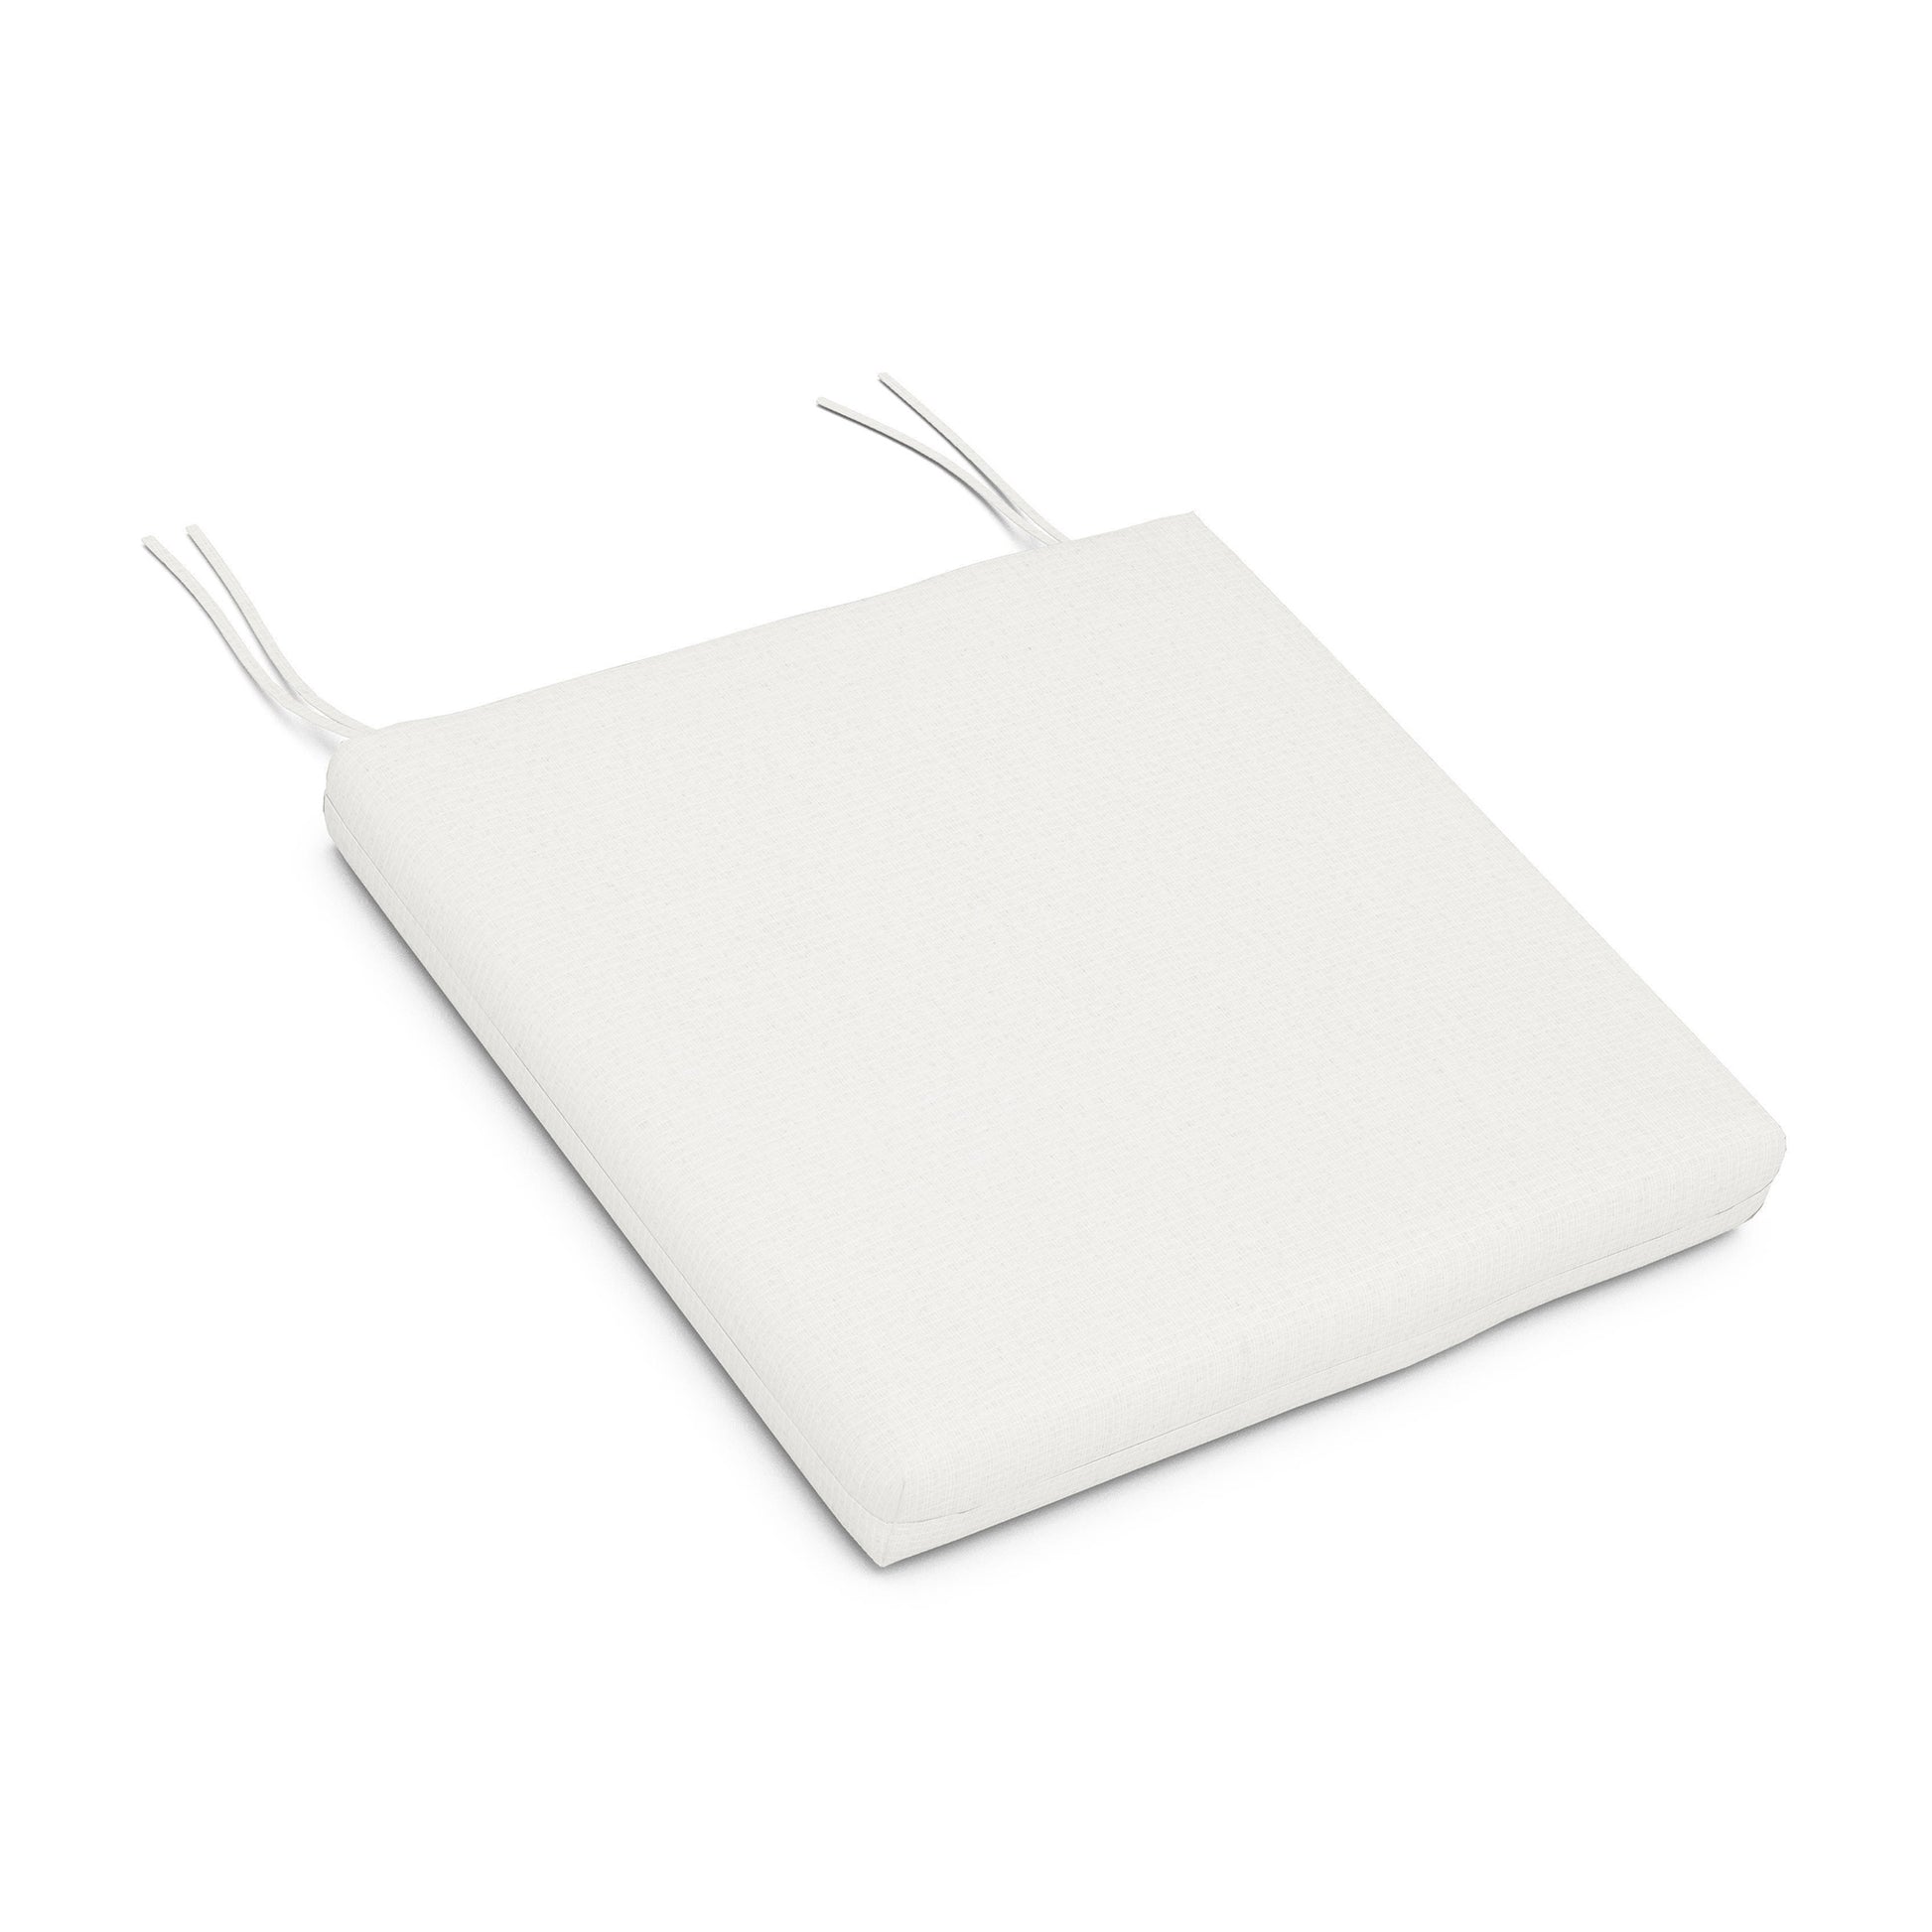 A 3D rendering of a POLYWOOD XPWS0007 Seat Cushion with weather-resistant upholstery fabric and two loose fabric straps on each side, displayed on a white background.